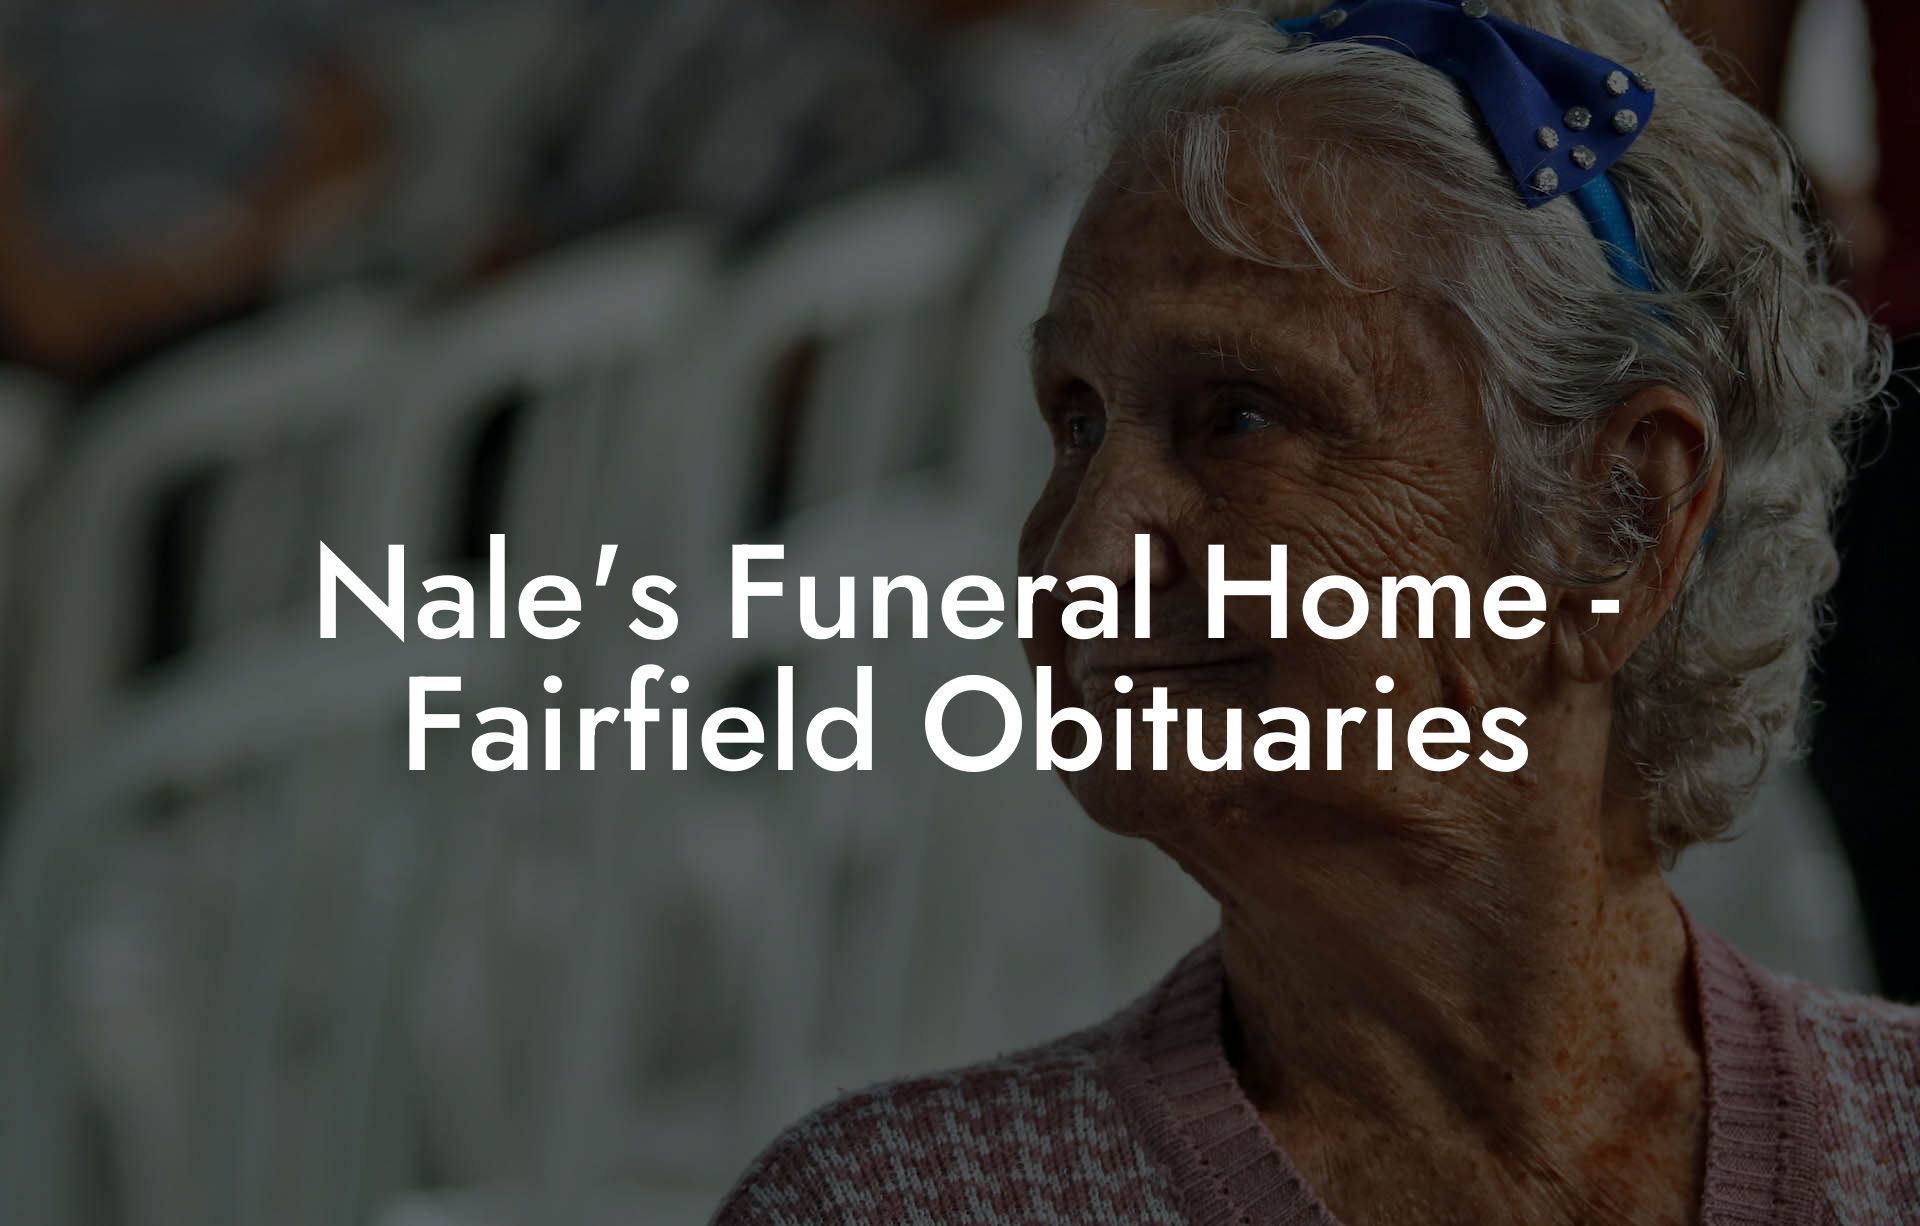 Nale's Funeral Home - Fairfield Obituaries